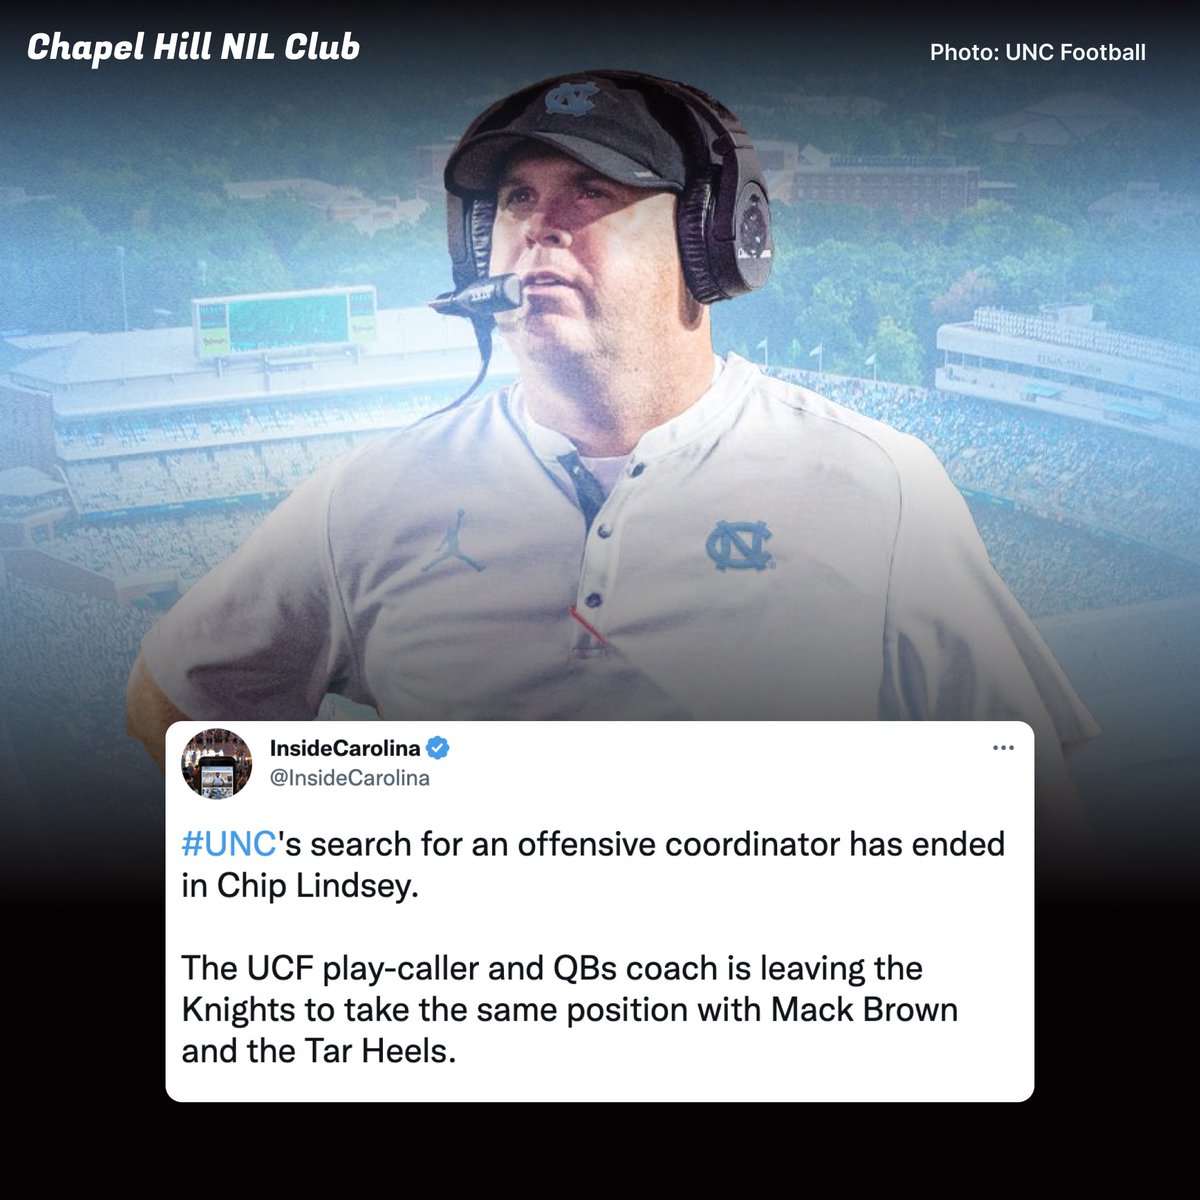 There's a new face in Chapel Hill! 🐏 #CarolinaFootball